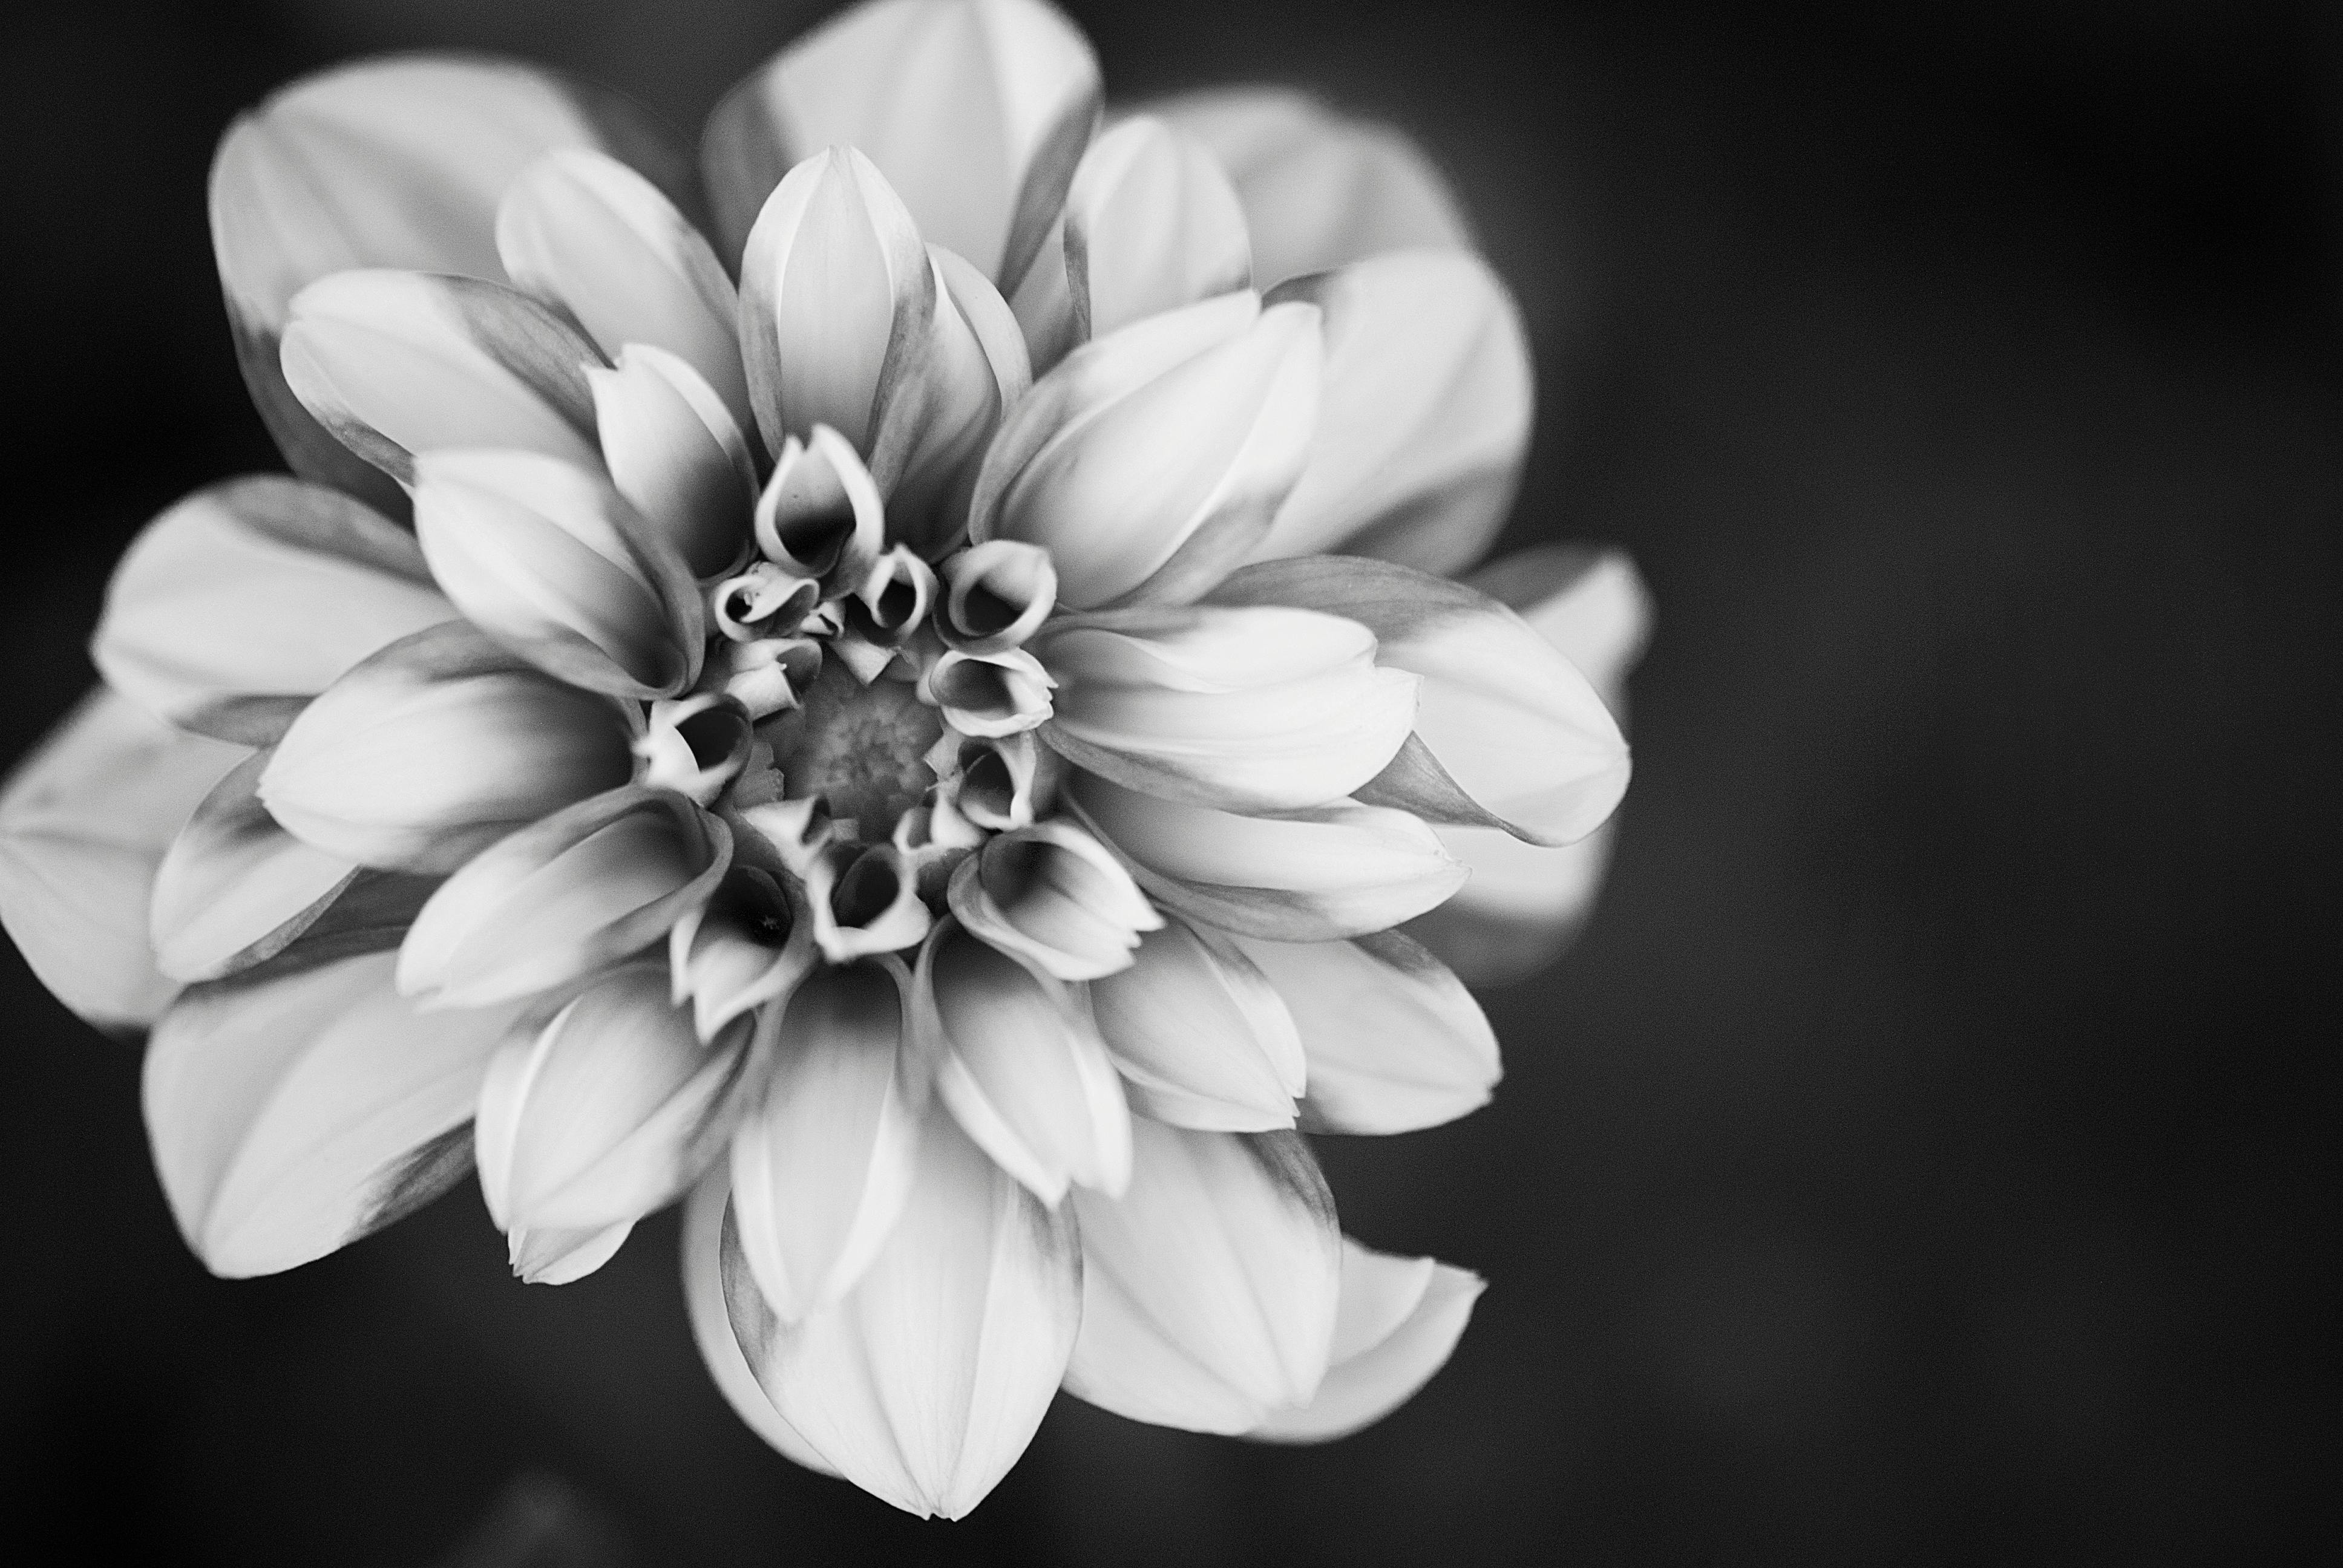 Black and white flower Images - Search Images on Everypixel